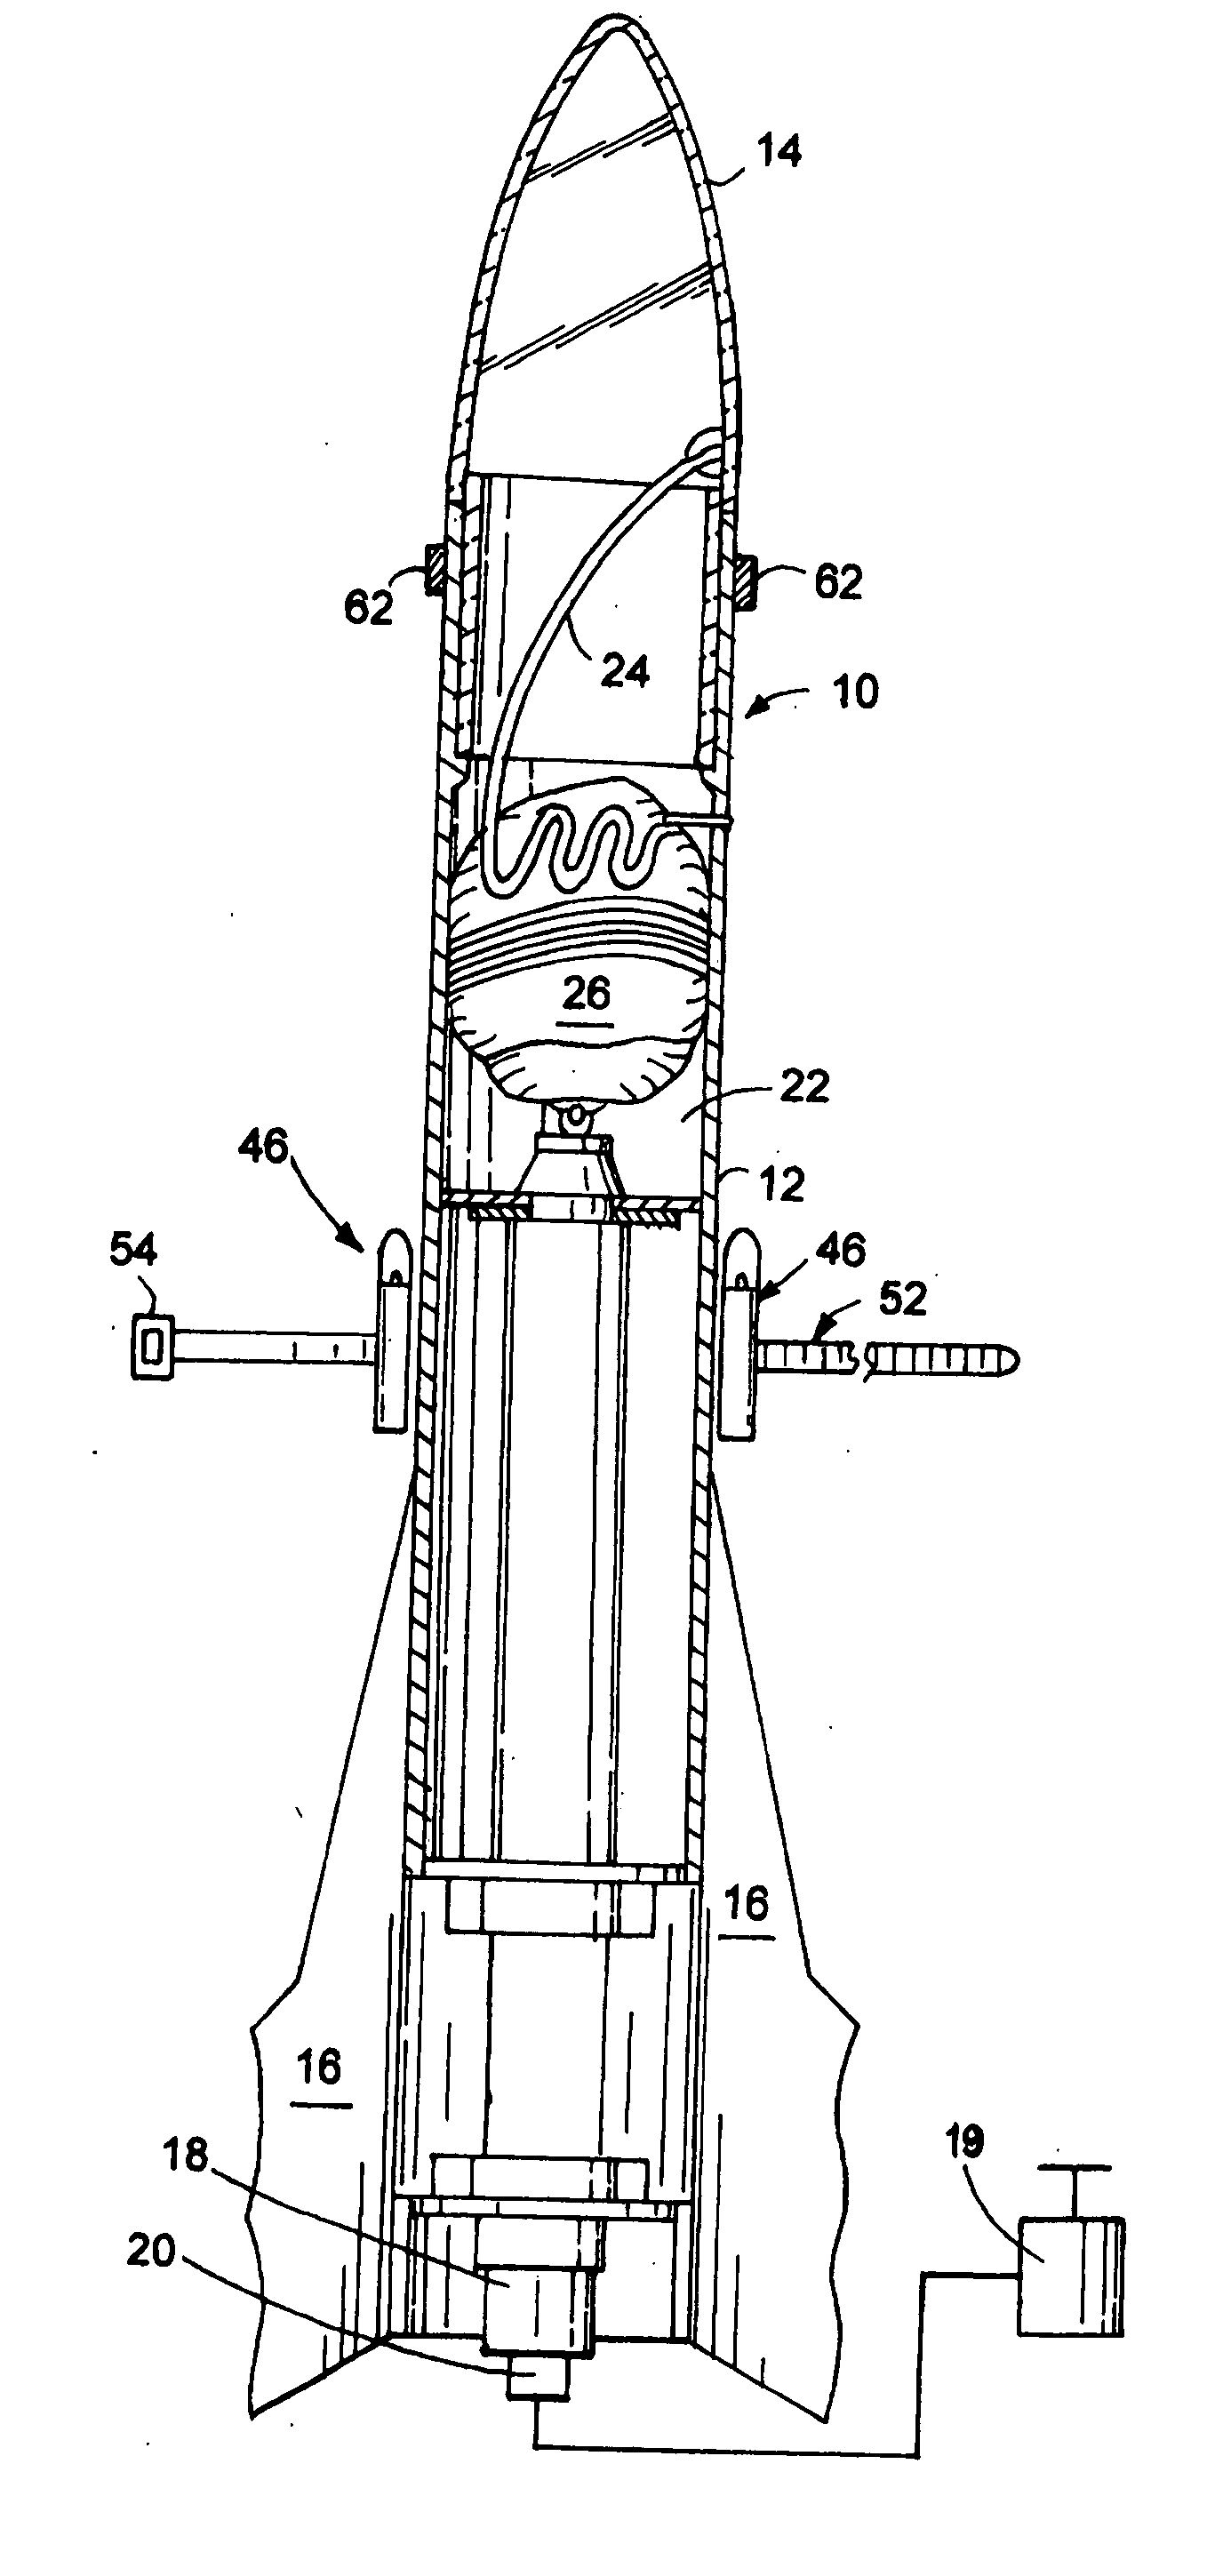 Airborne device such as model rocket with light and sound for observing and retrieving